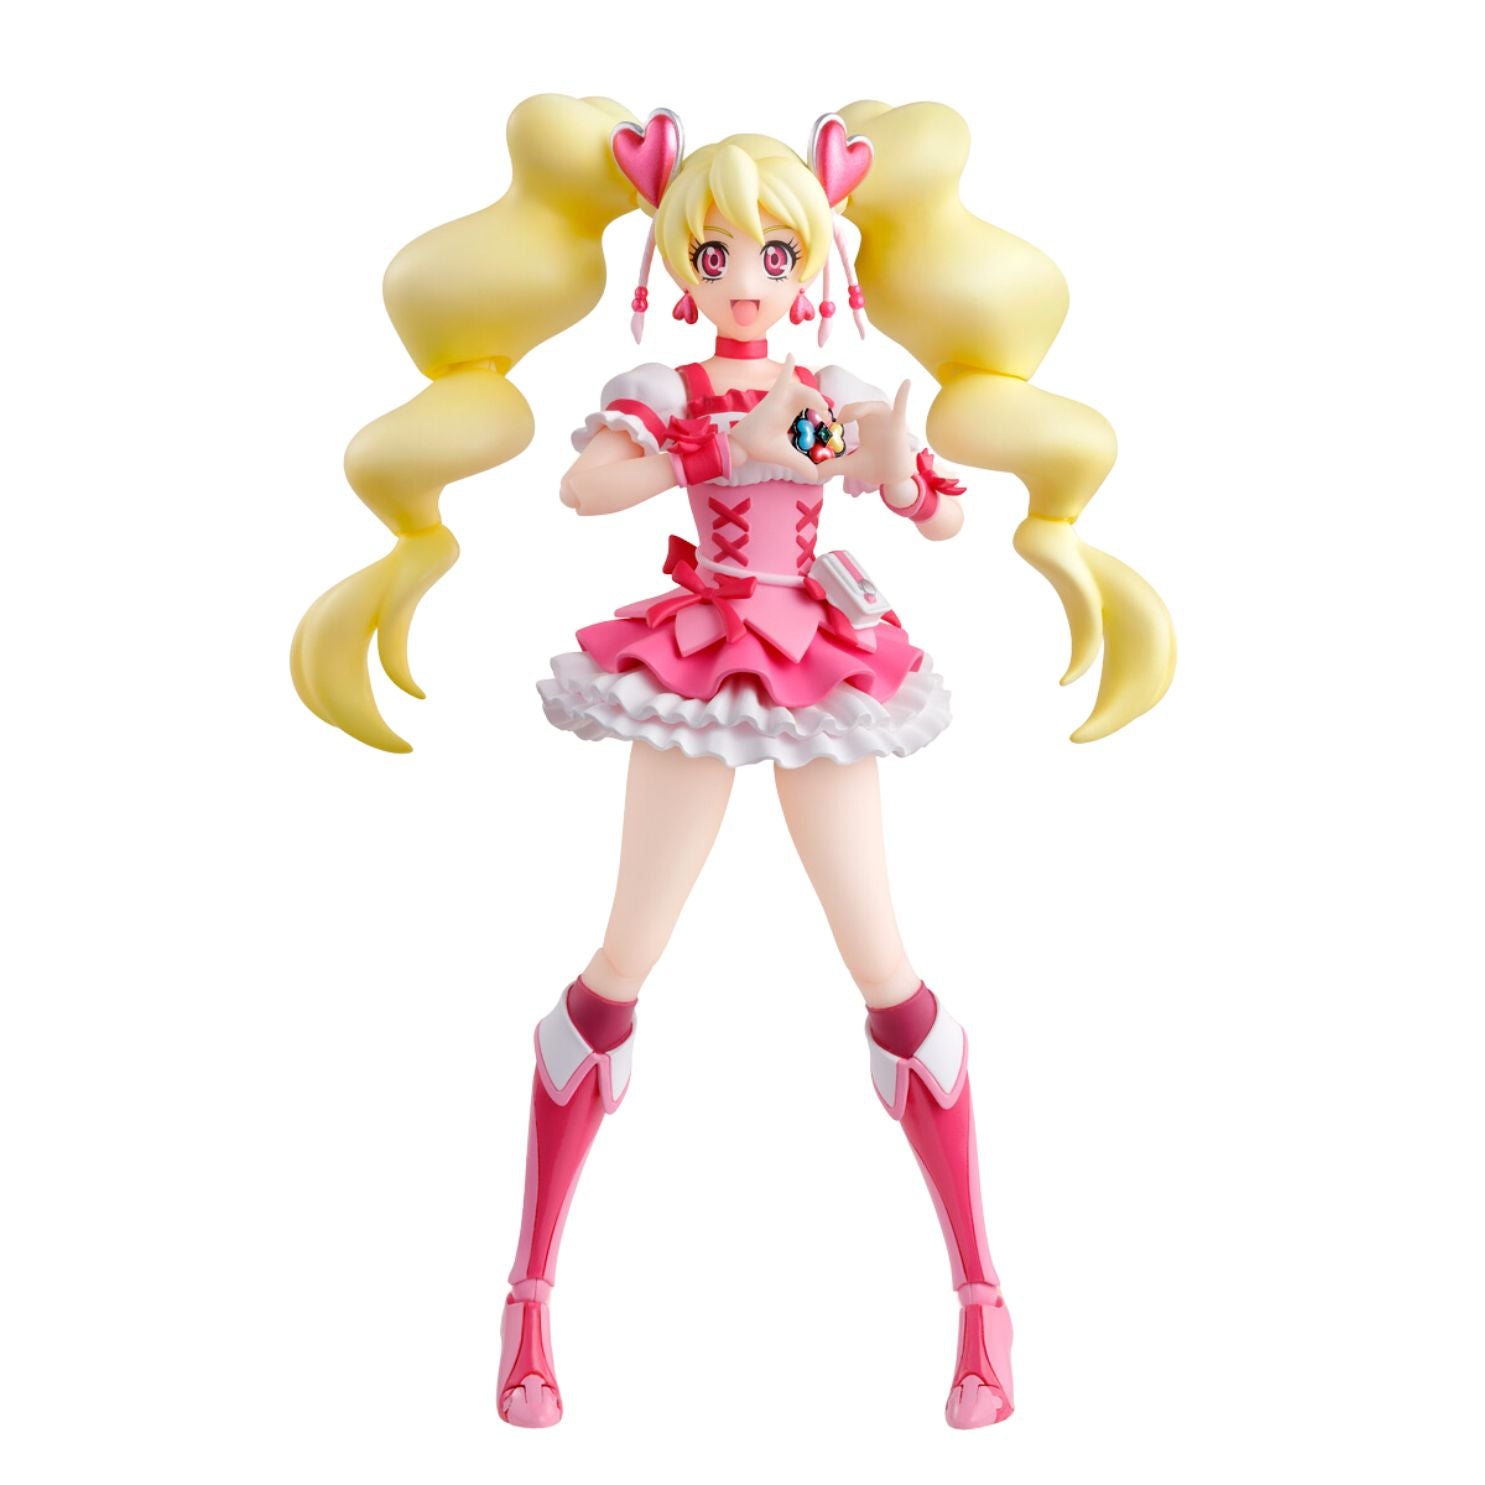 Cure Peach Precure Character Designer’S Edition S.H.Figuarts by Tamashii Nations -Tamashii Nations - India - www.superherotoystore.com